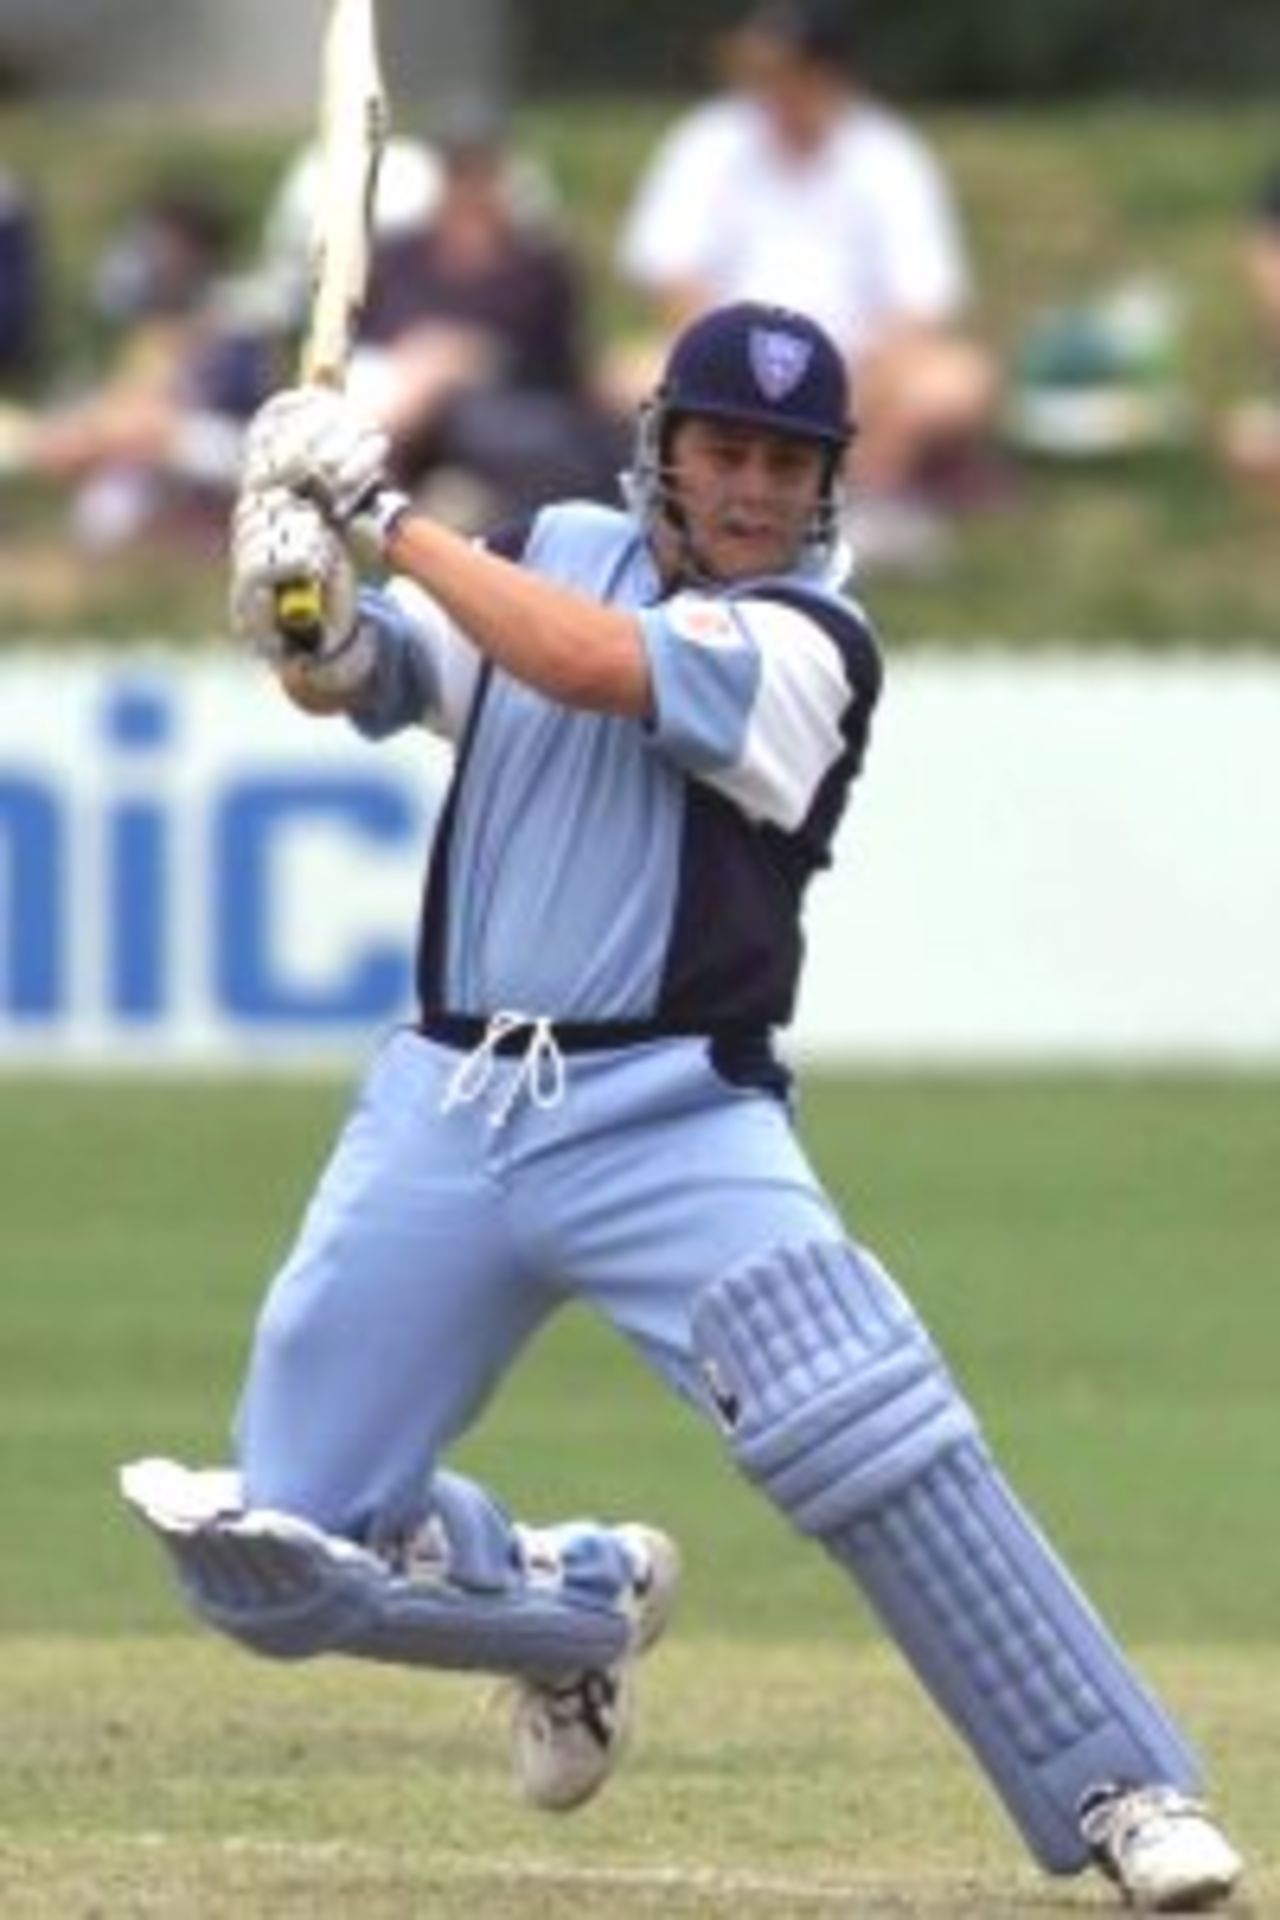 16 Jan 2000: Mark Higgs of NSW Blues cuts while Canberra Comets wicketkeeper Duncan Brede watches on during the NSW Blues v Canberra Comets Mercantile Mutual Cup game at Manuka Oval, Canberra, Australia.